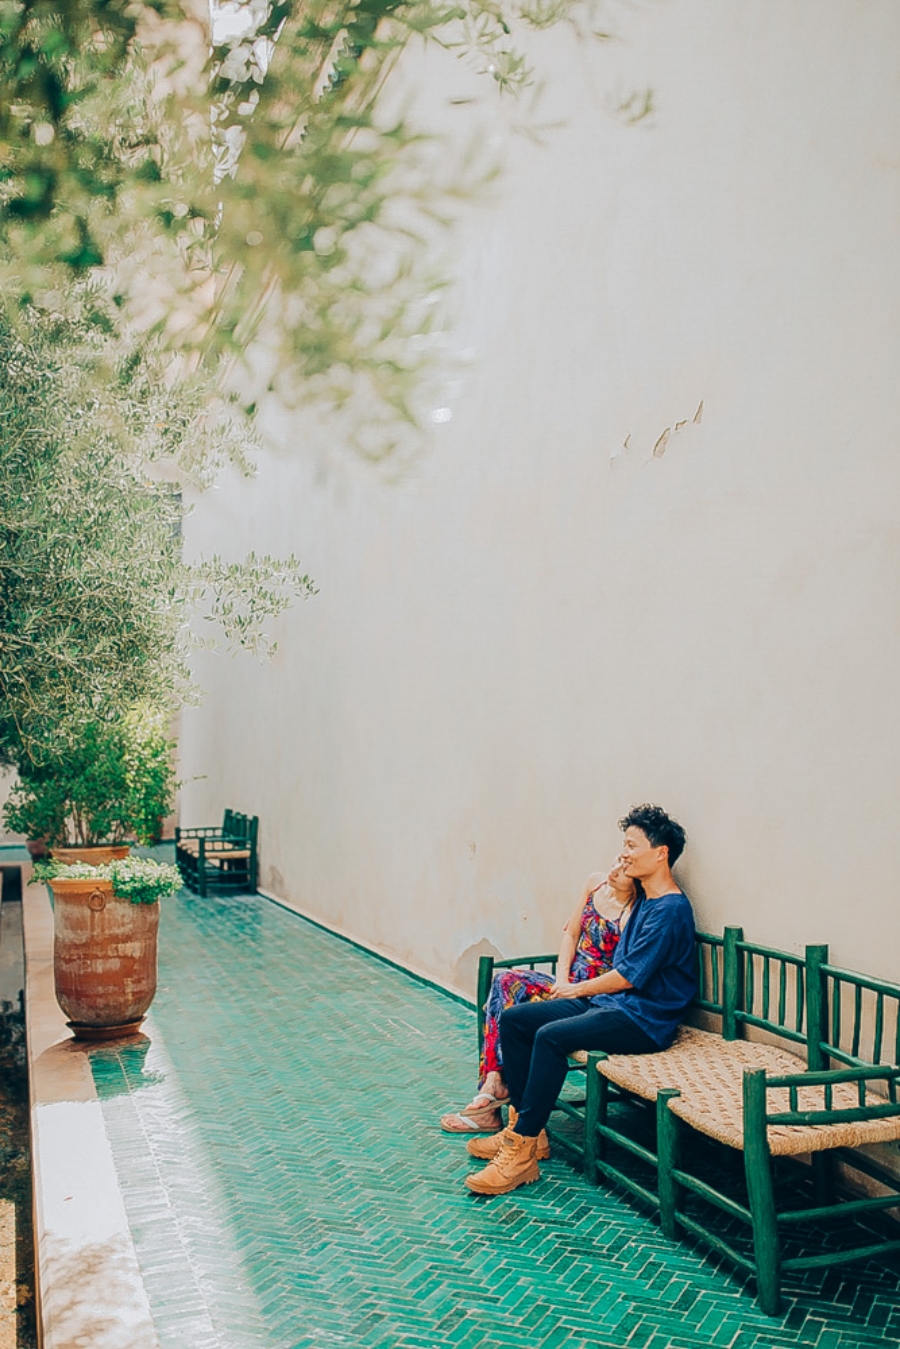 Morocco Pre-Wedding Photoshoot At Marrakech - Le Jardin Secret And Djemma El Fna Tower by Rich on OneThreeOneFour 5